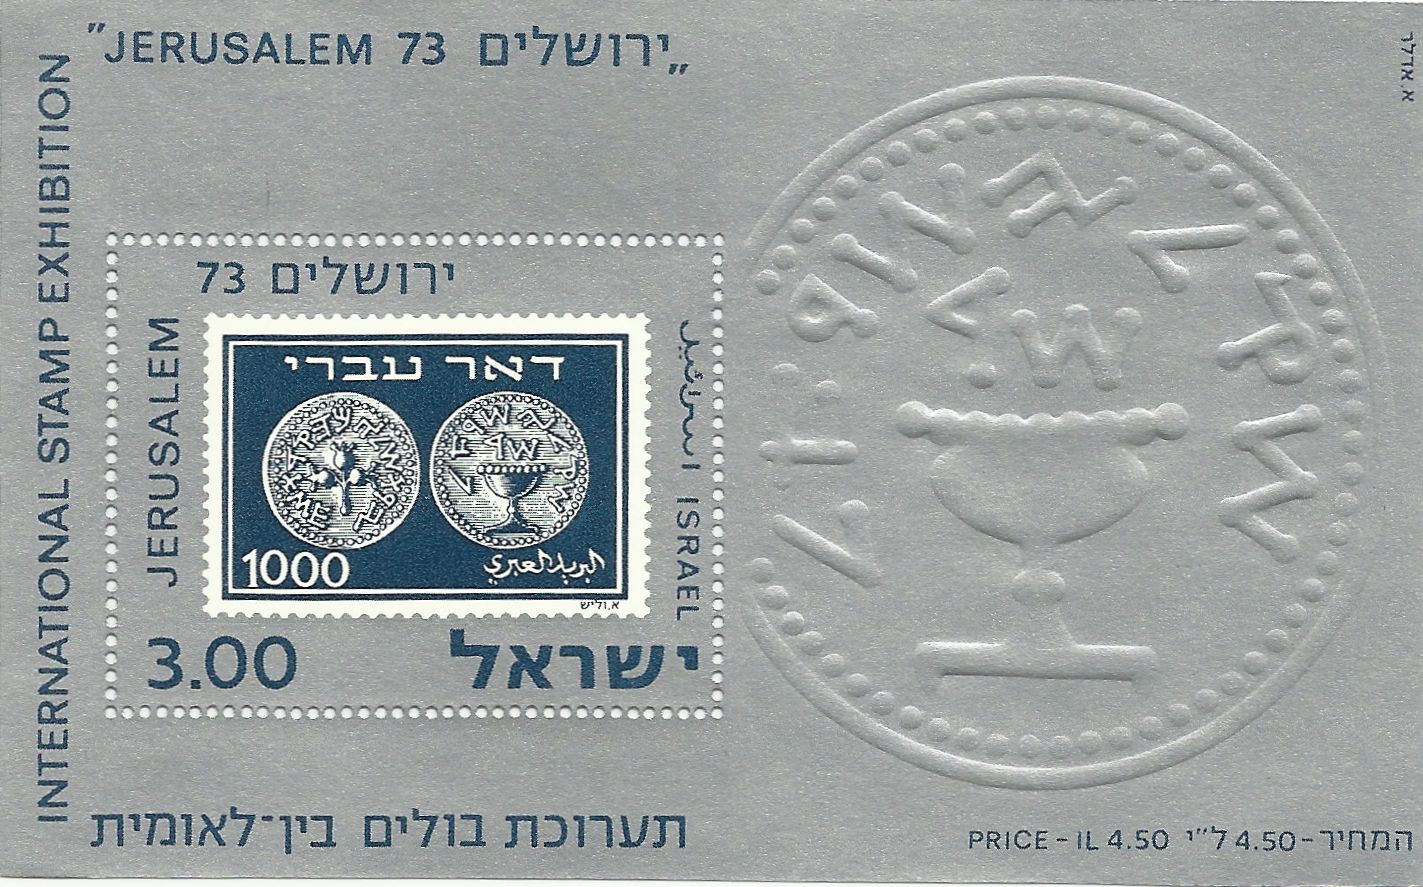 http://static.israelphilately.org.il/images/stamps/1358_L.jpg